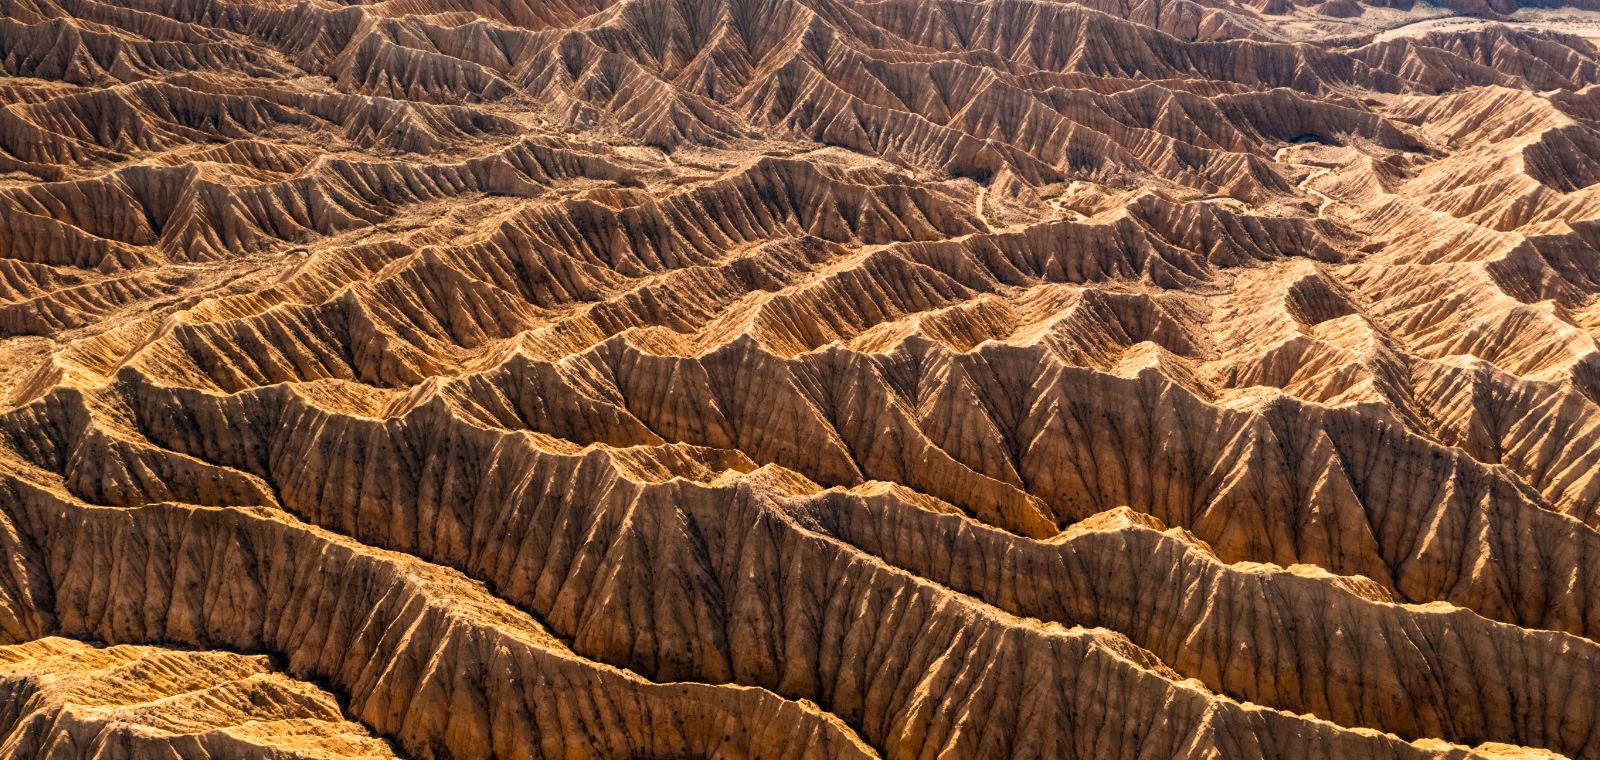 A jagged, rocky landscape unfolds under an aerial view 